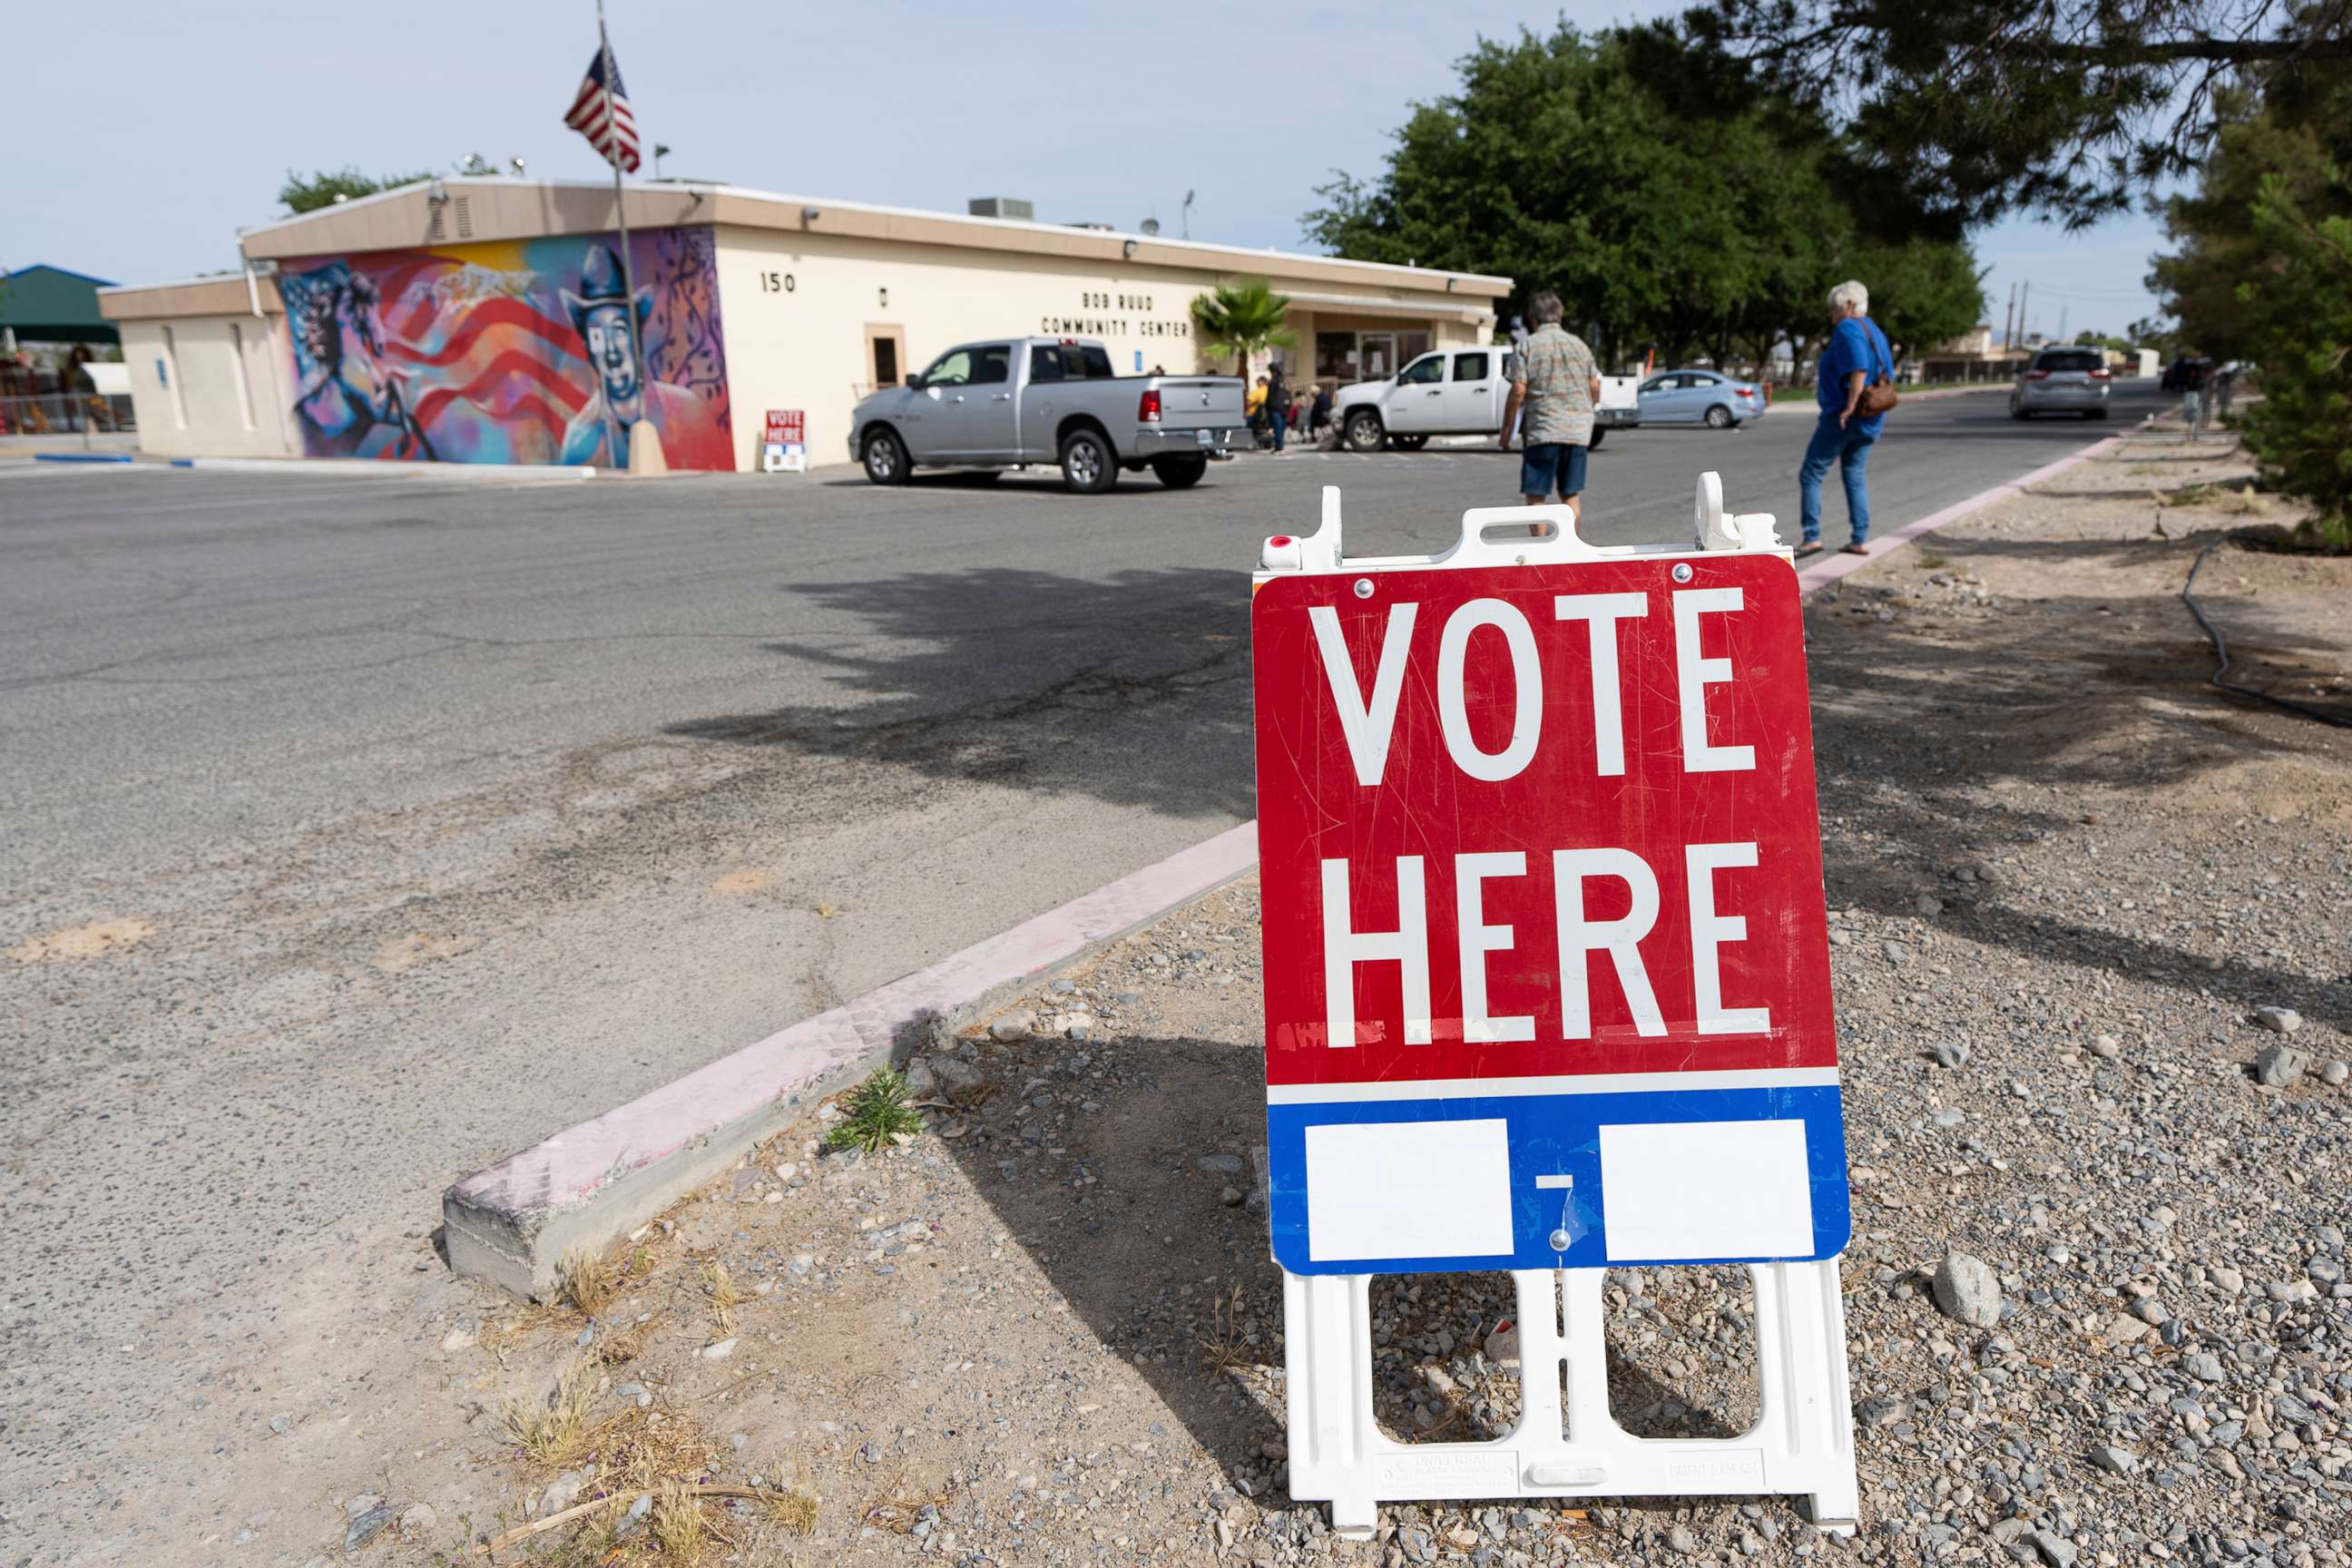 PHOTO: In this May 28, 2022, file photo, voters in Nye County arrives on the first day of early voting at the Bob Ruud Community Center in Pahrump, Nev.